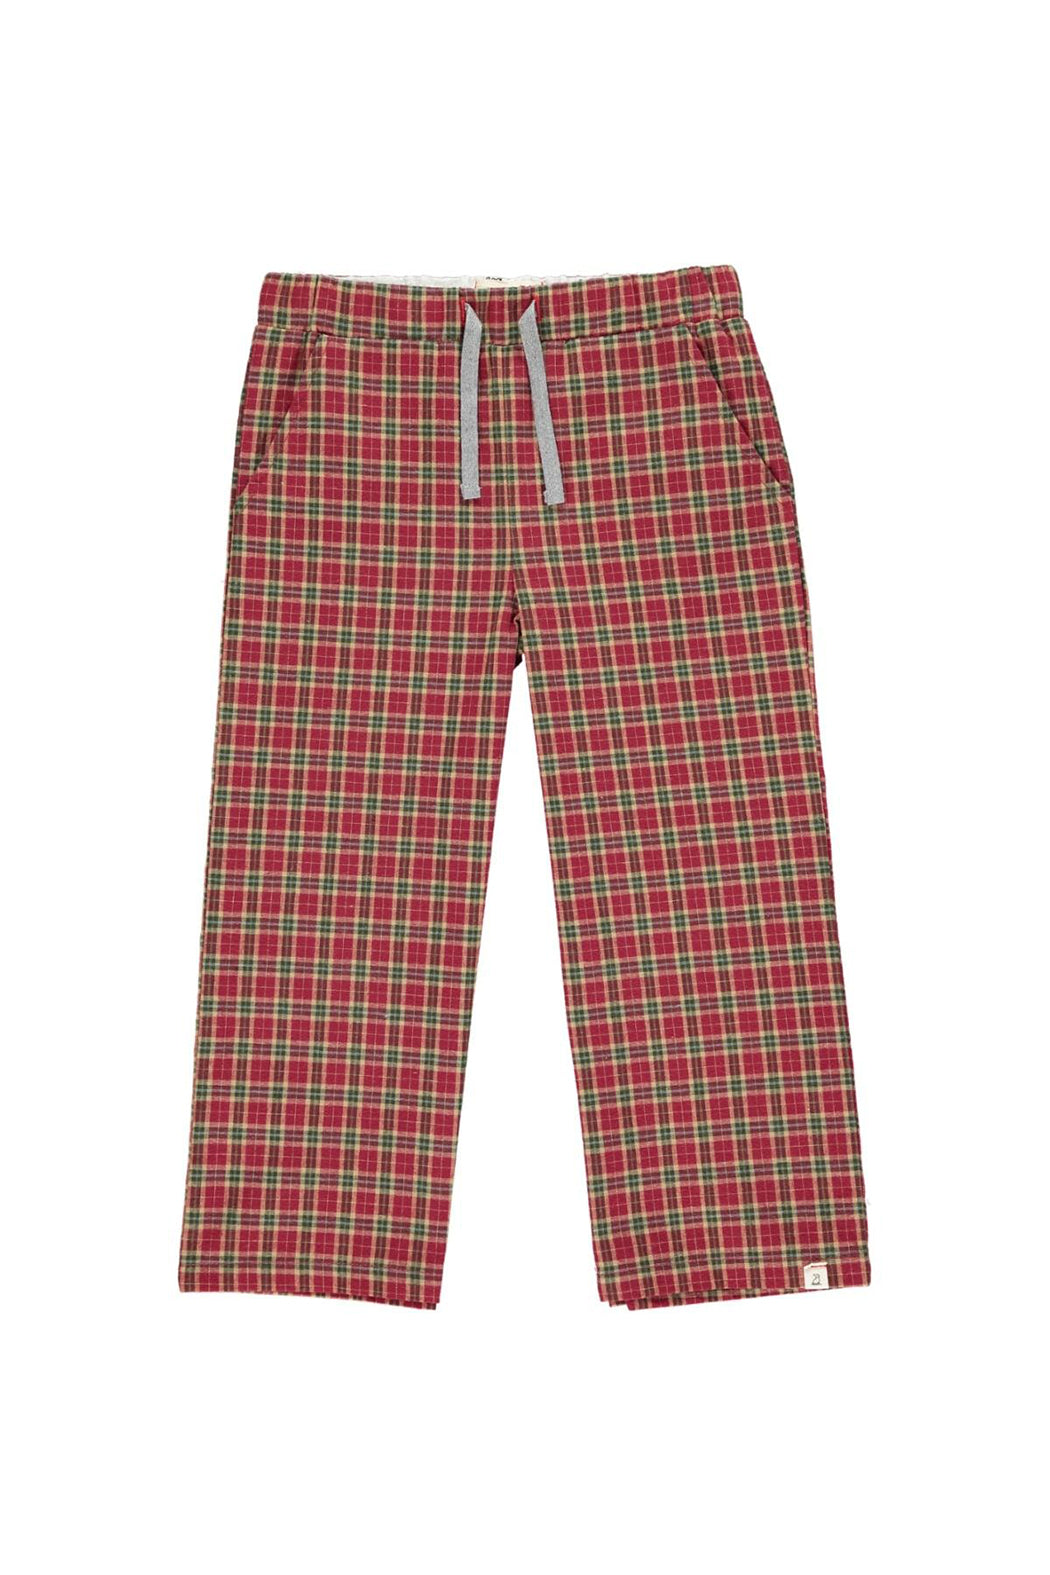 Me & Henry Rockford Lounge Pants - Red Plaid